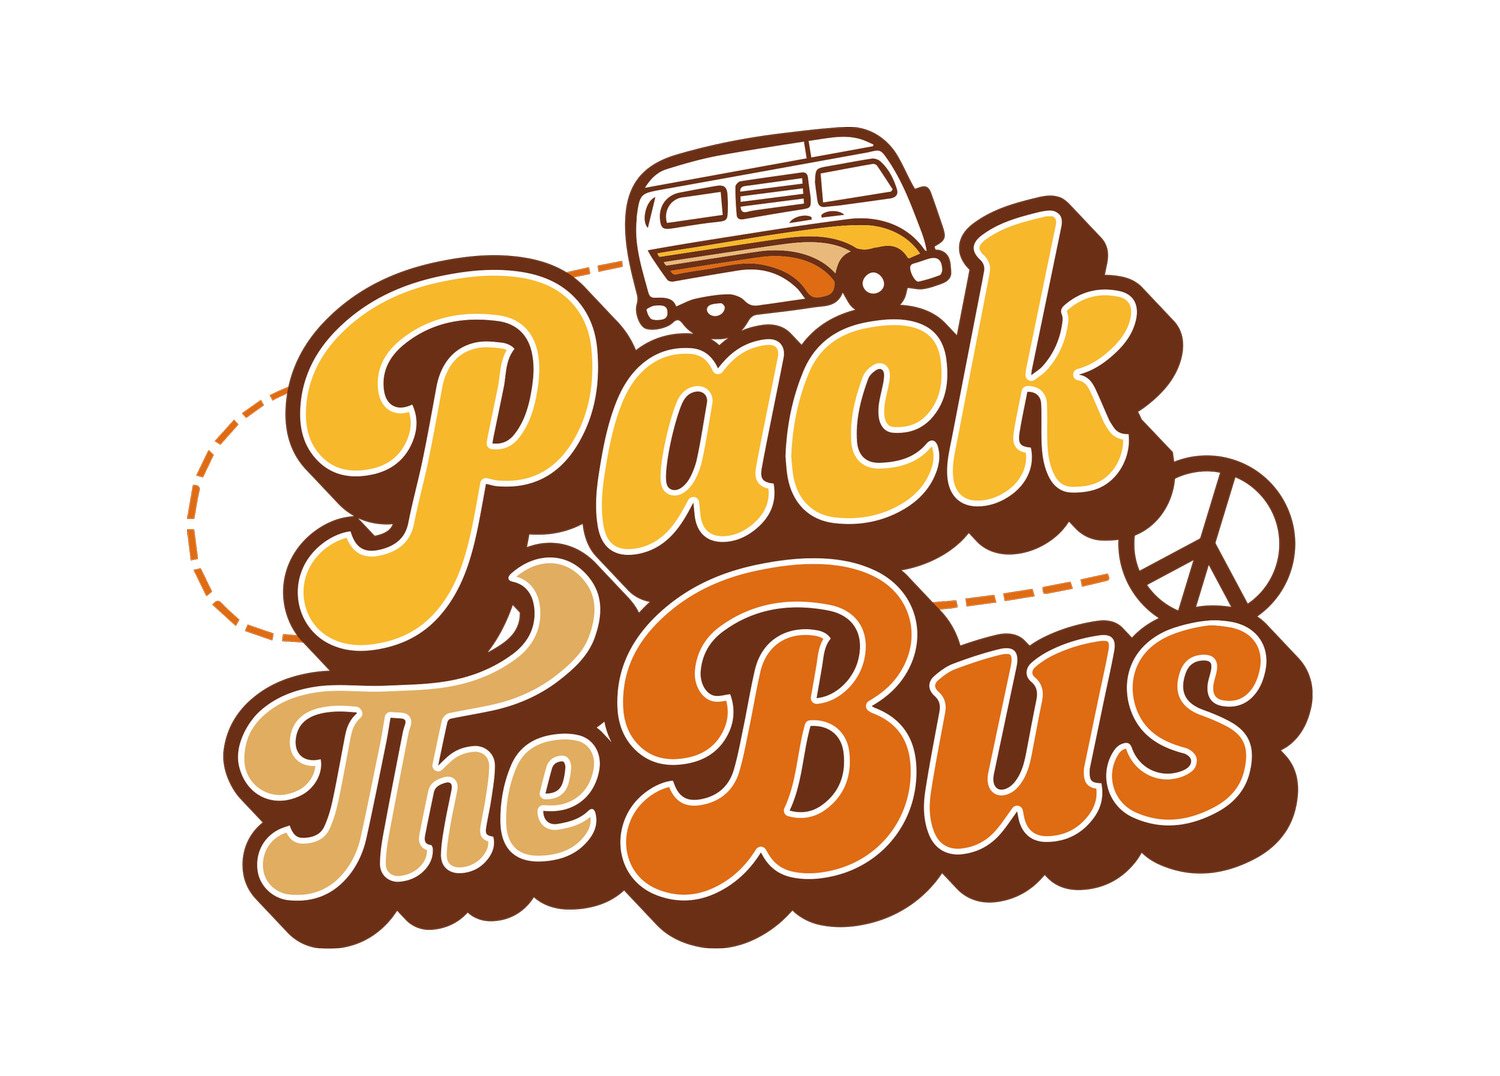 Packthebus